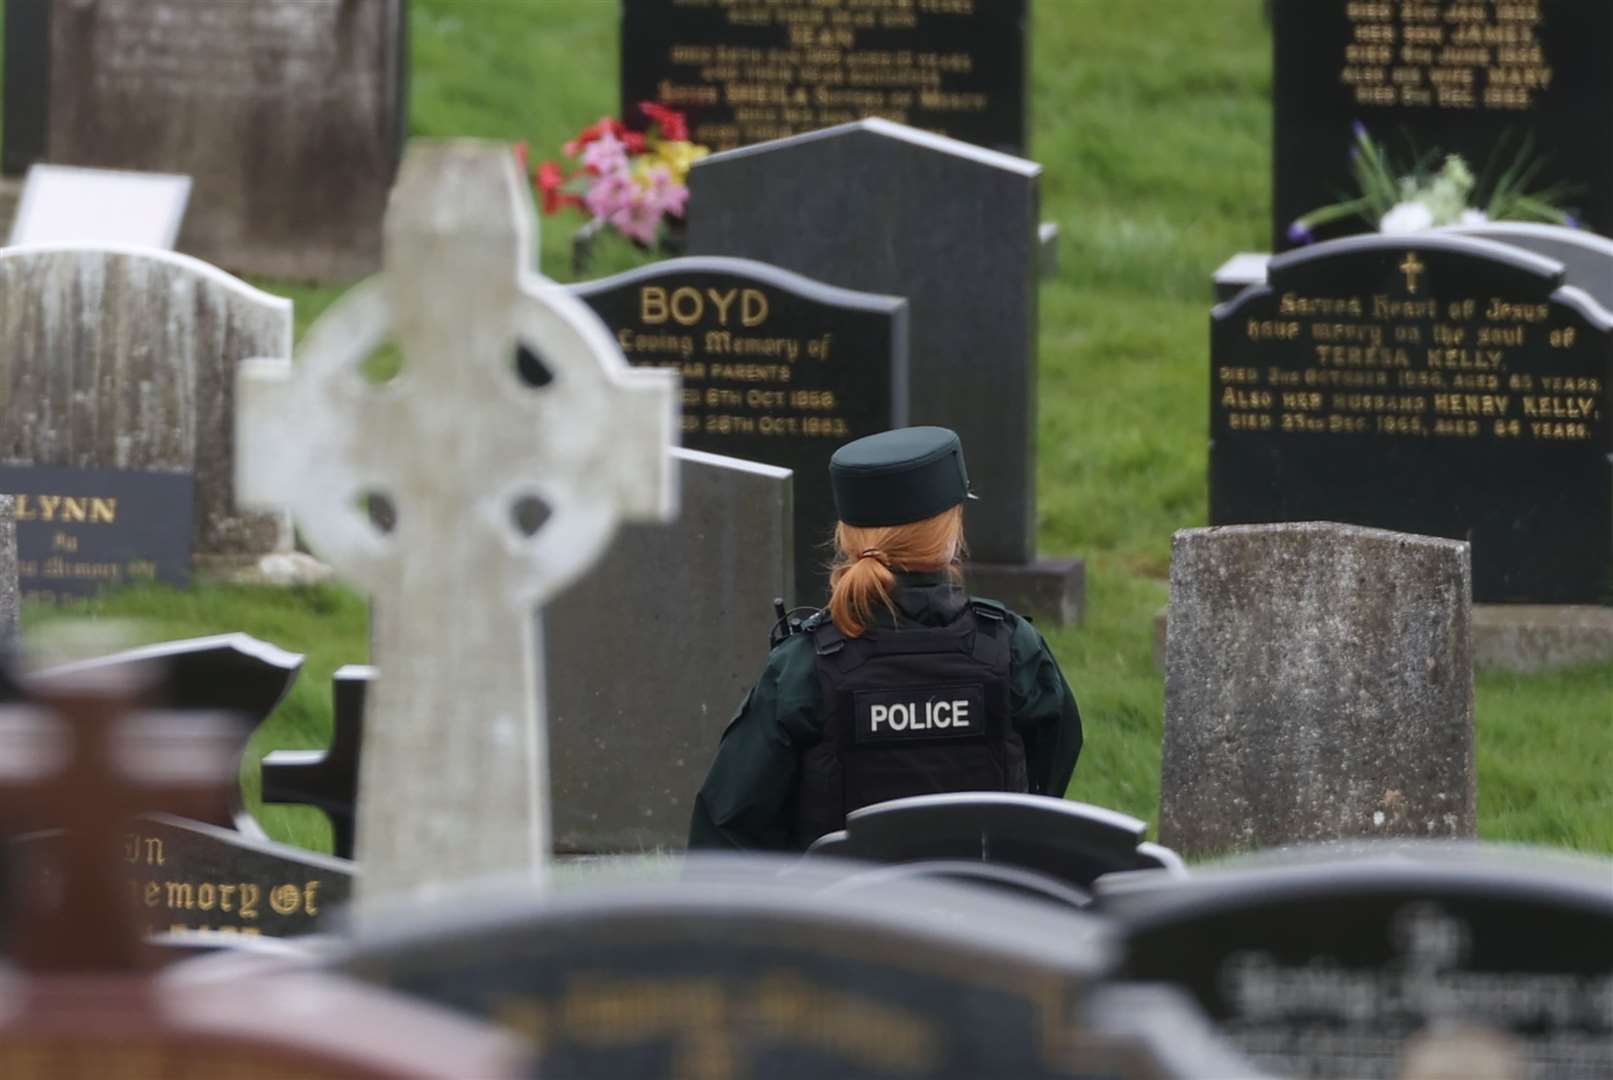 A PSNI officer inside the cemetery on Tuesday (Liam McBurney/PA).